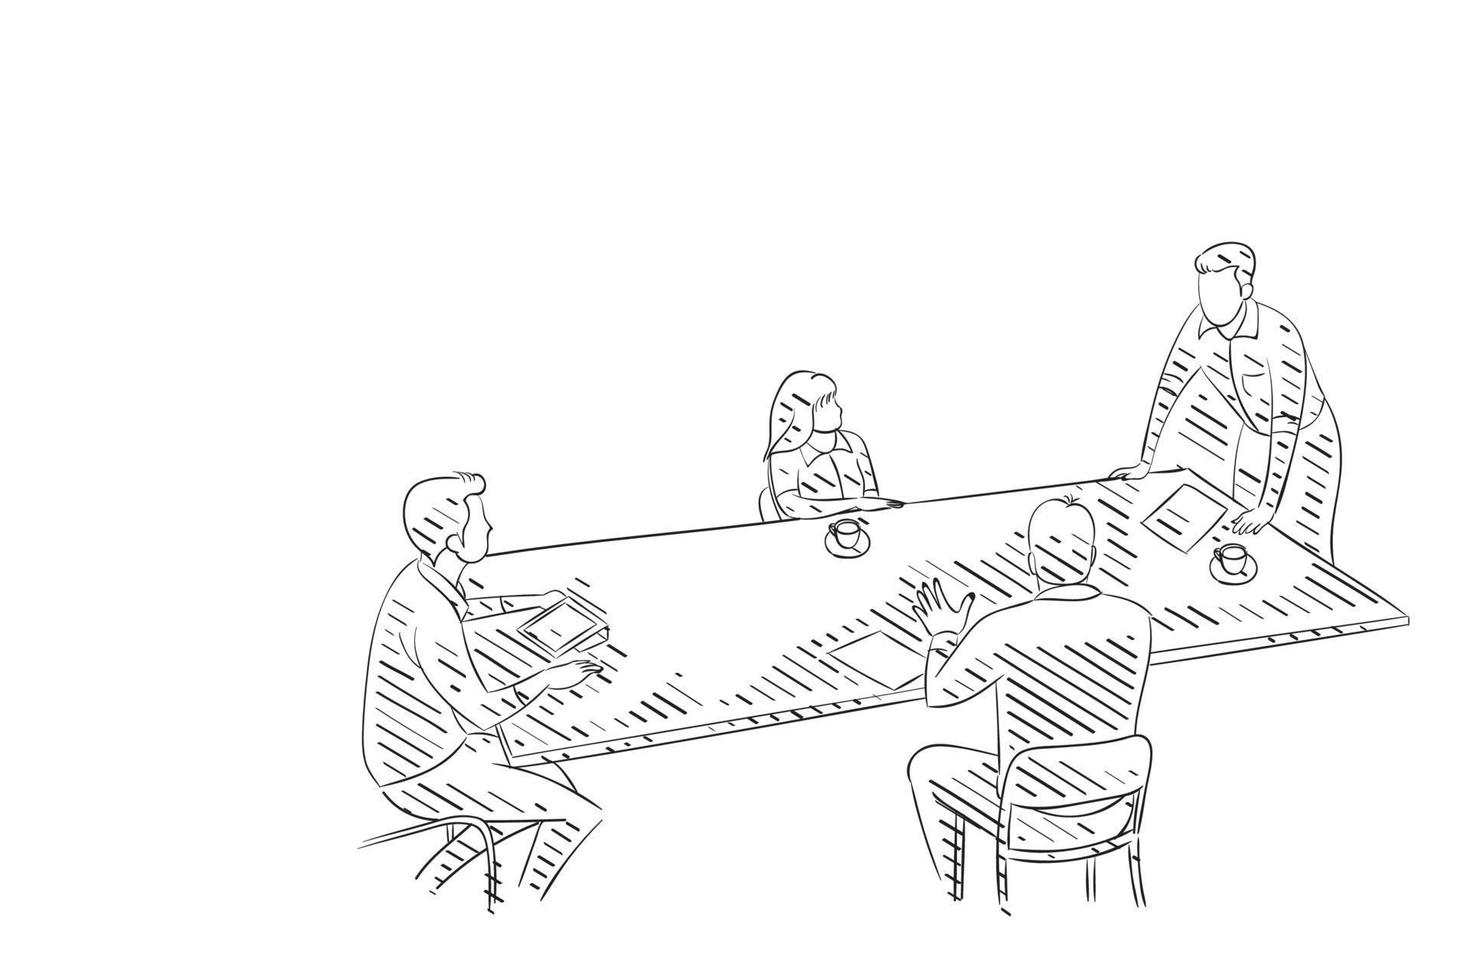 Hand drawn of business meeting in the office vector illustration